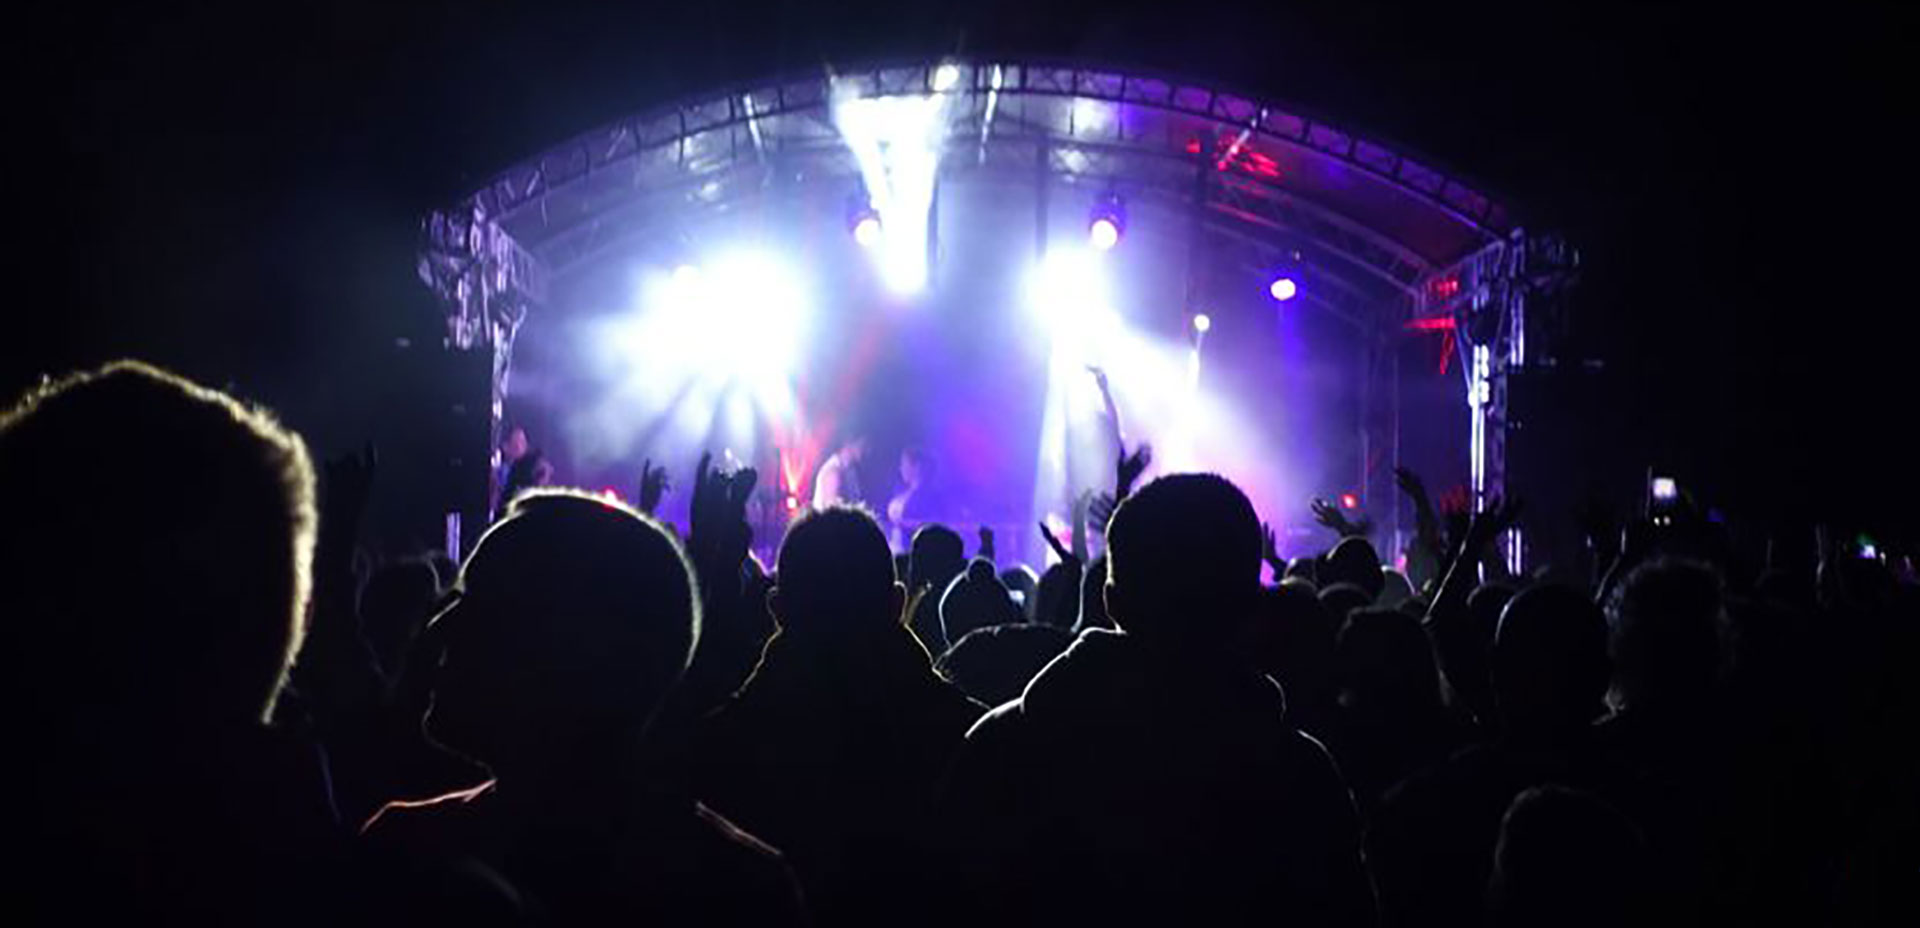 A backlit view of a crowd at a concert, facing a brightly lit stage with dramatic purple and blue lights illuminating performing artists during a camping festival.